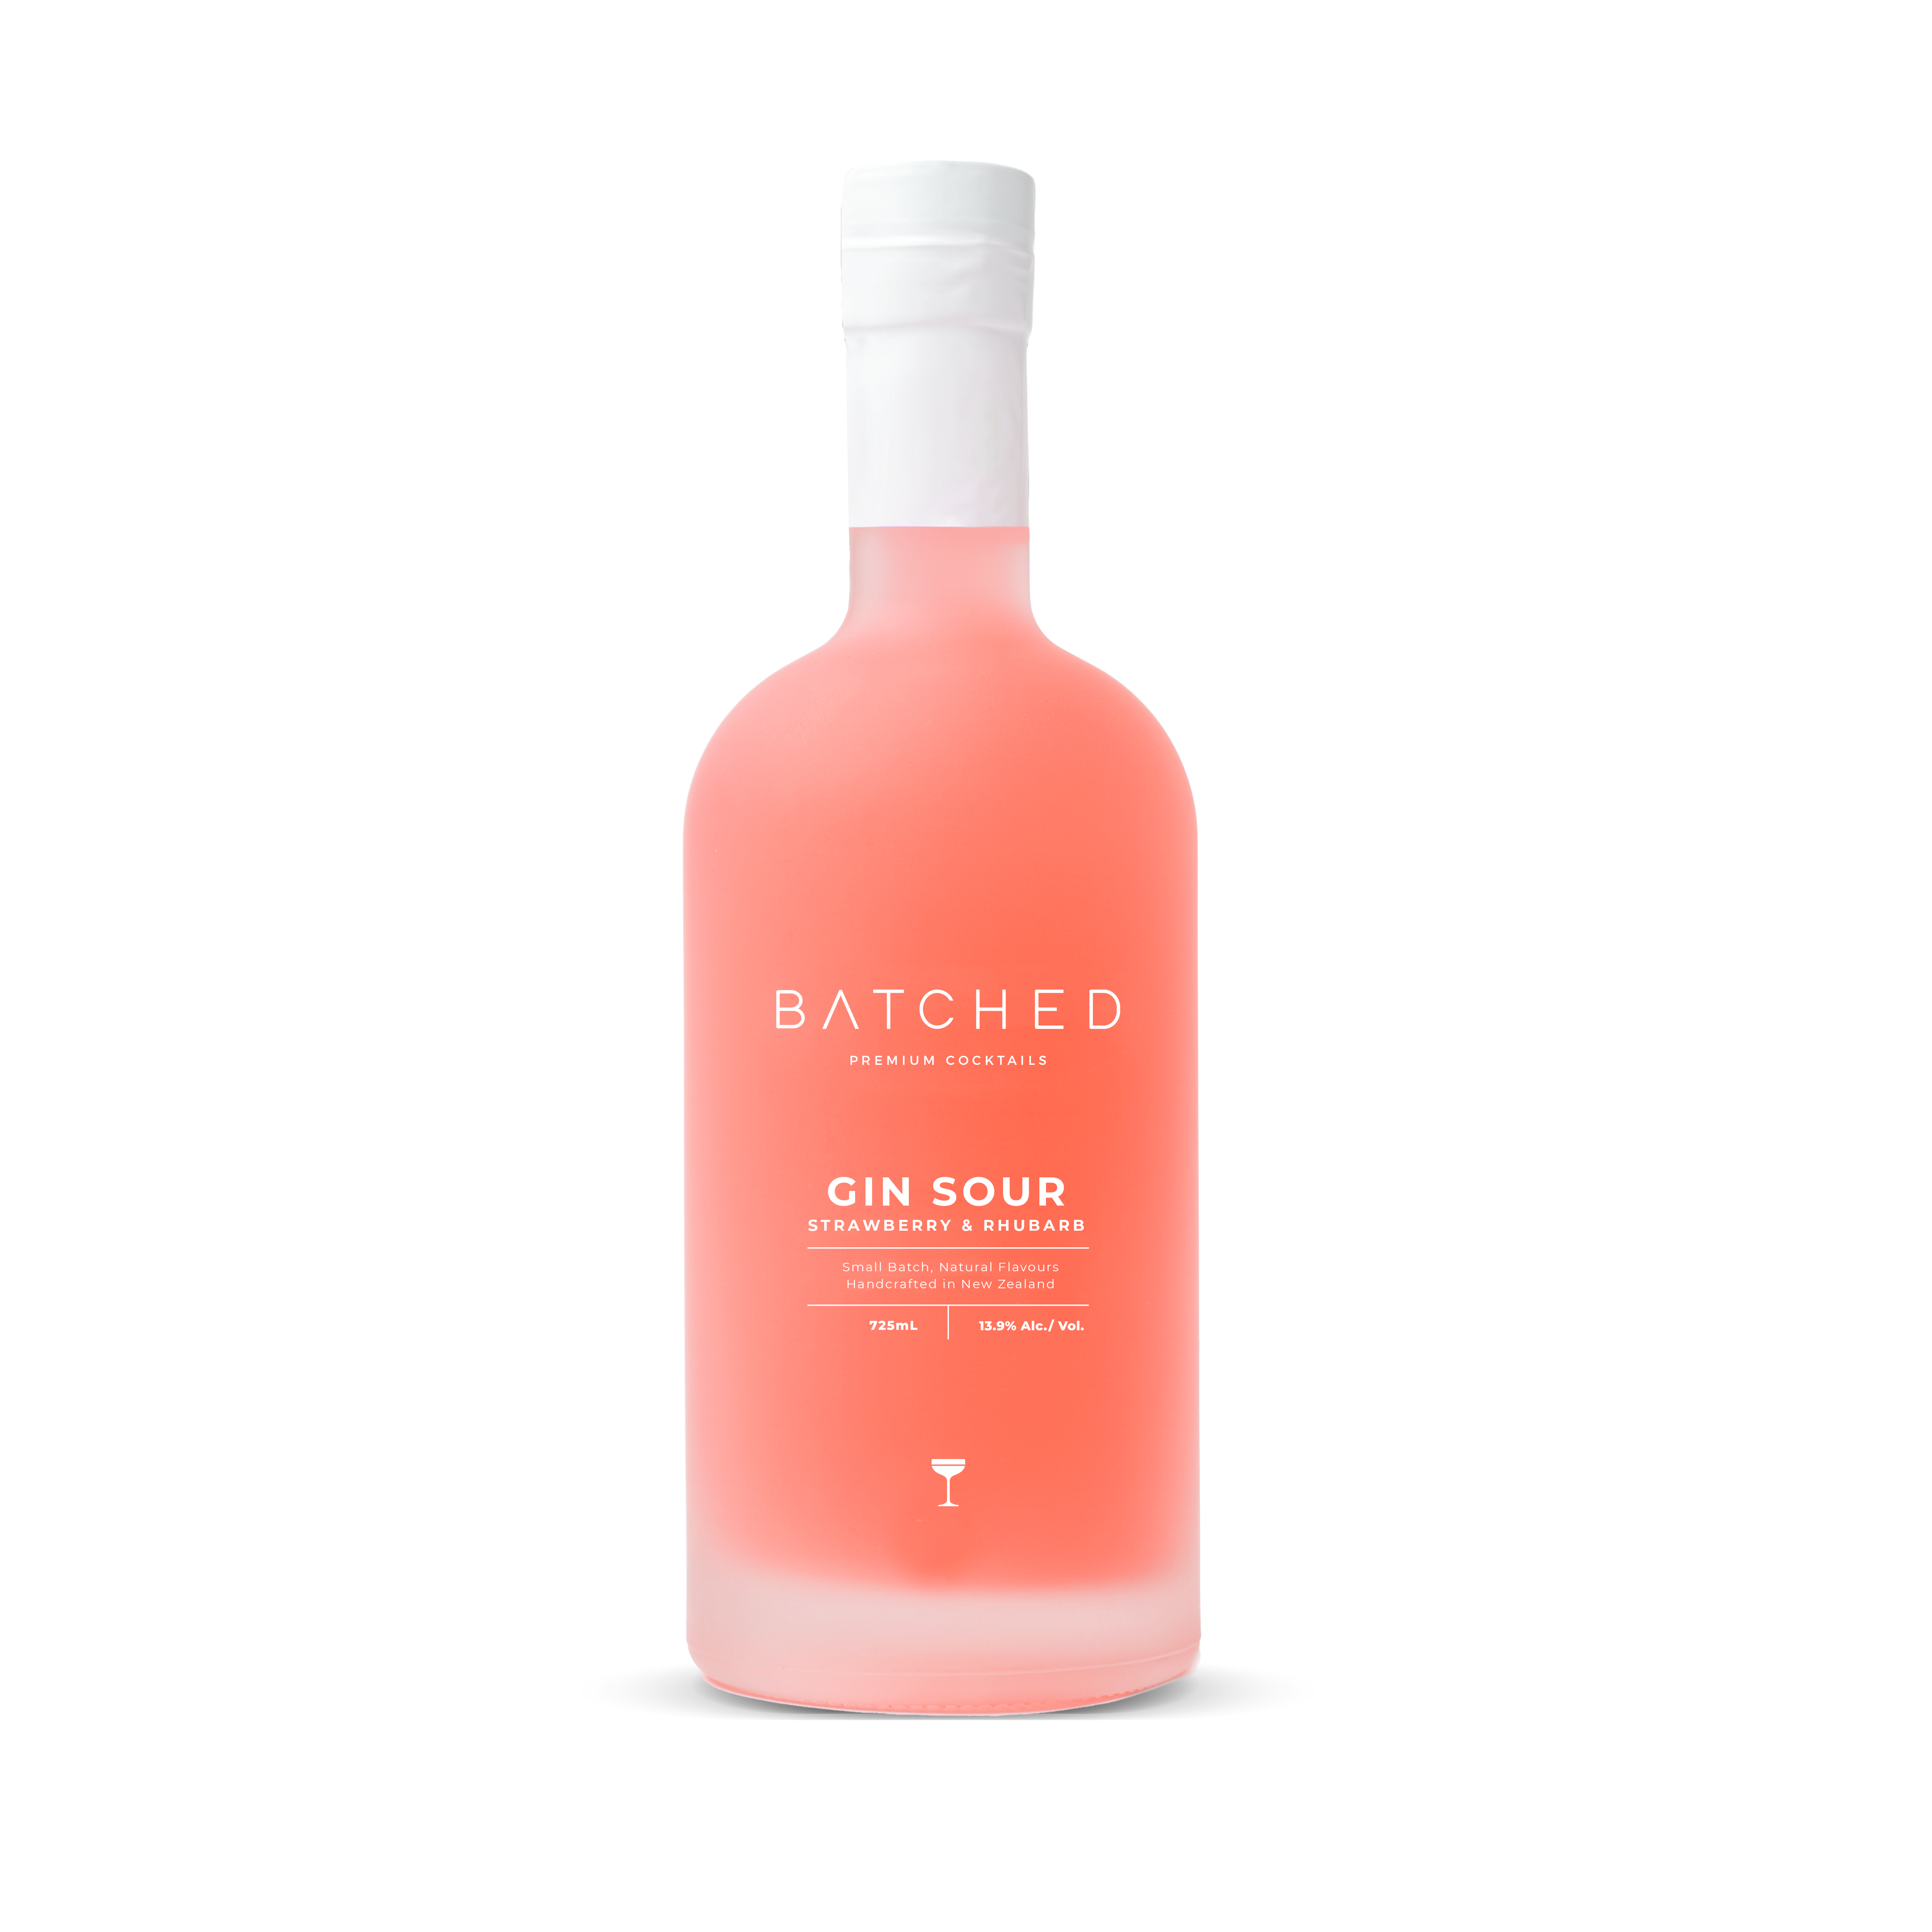 Batched Gin Sour bottle with blank background